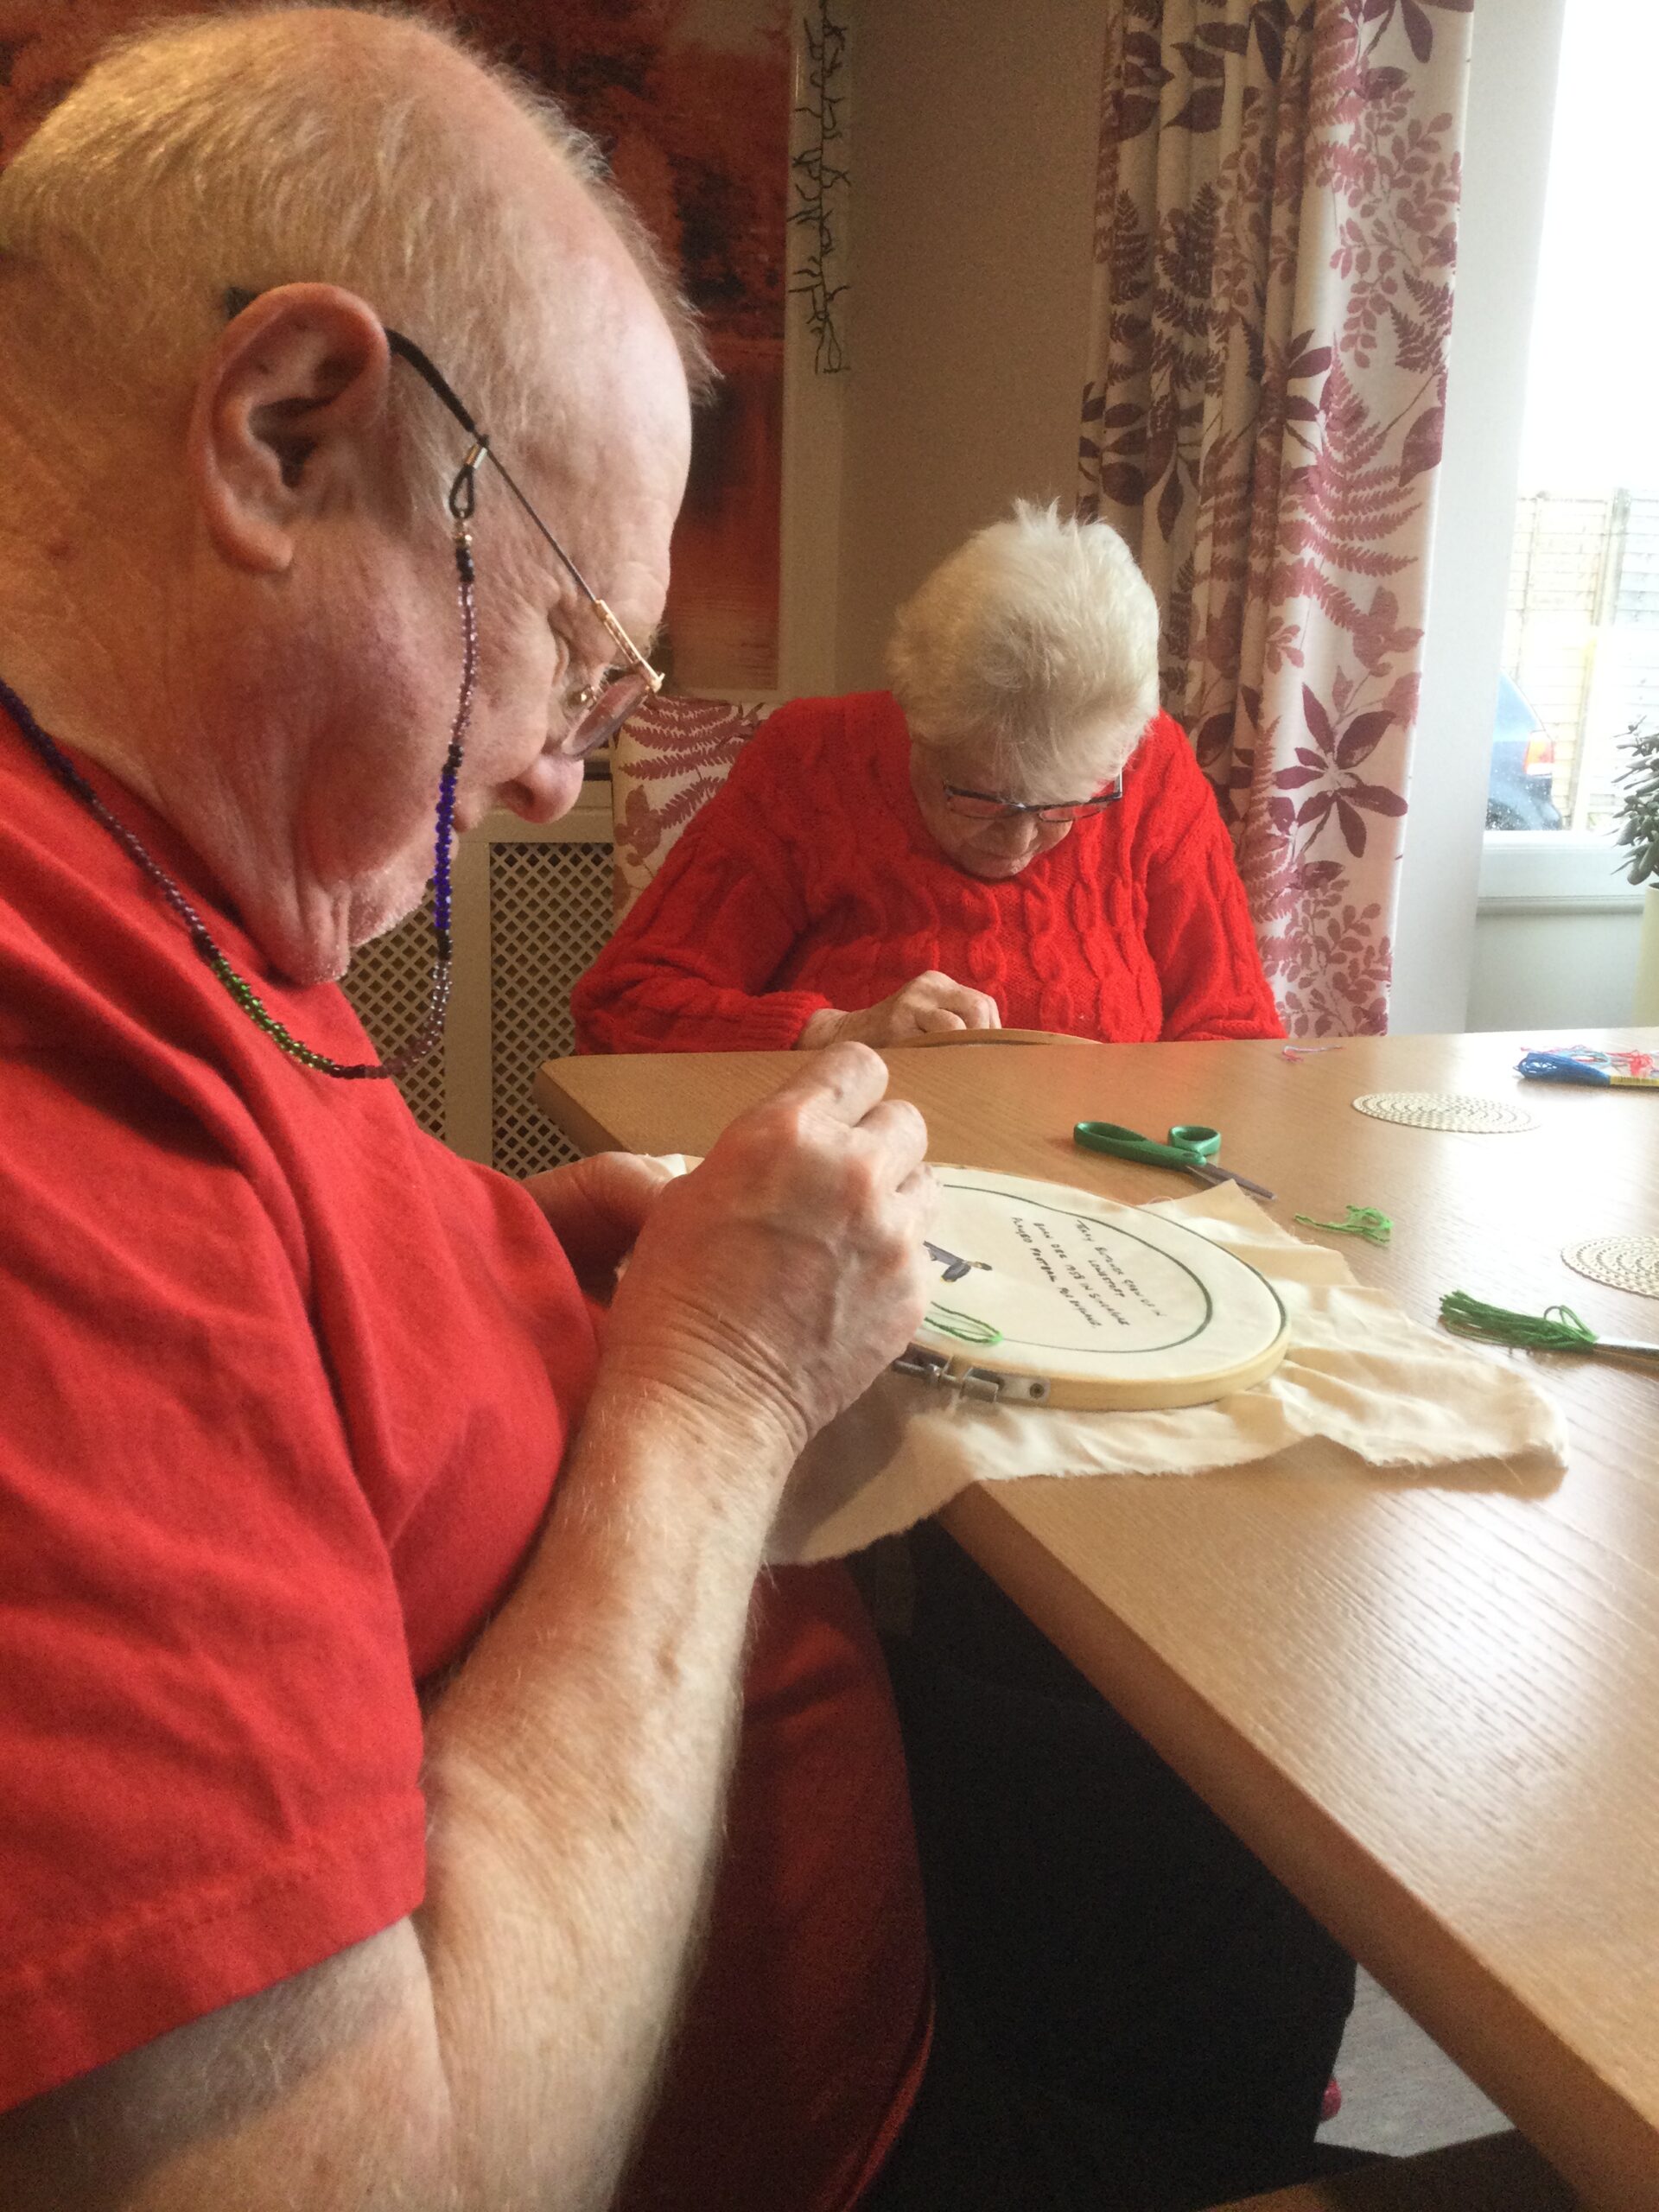 Two adults, each wearing red tops, sit concentrated on the work they're doing